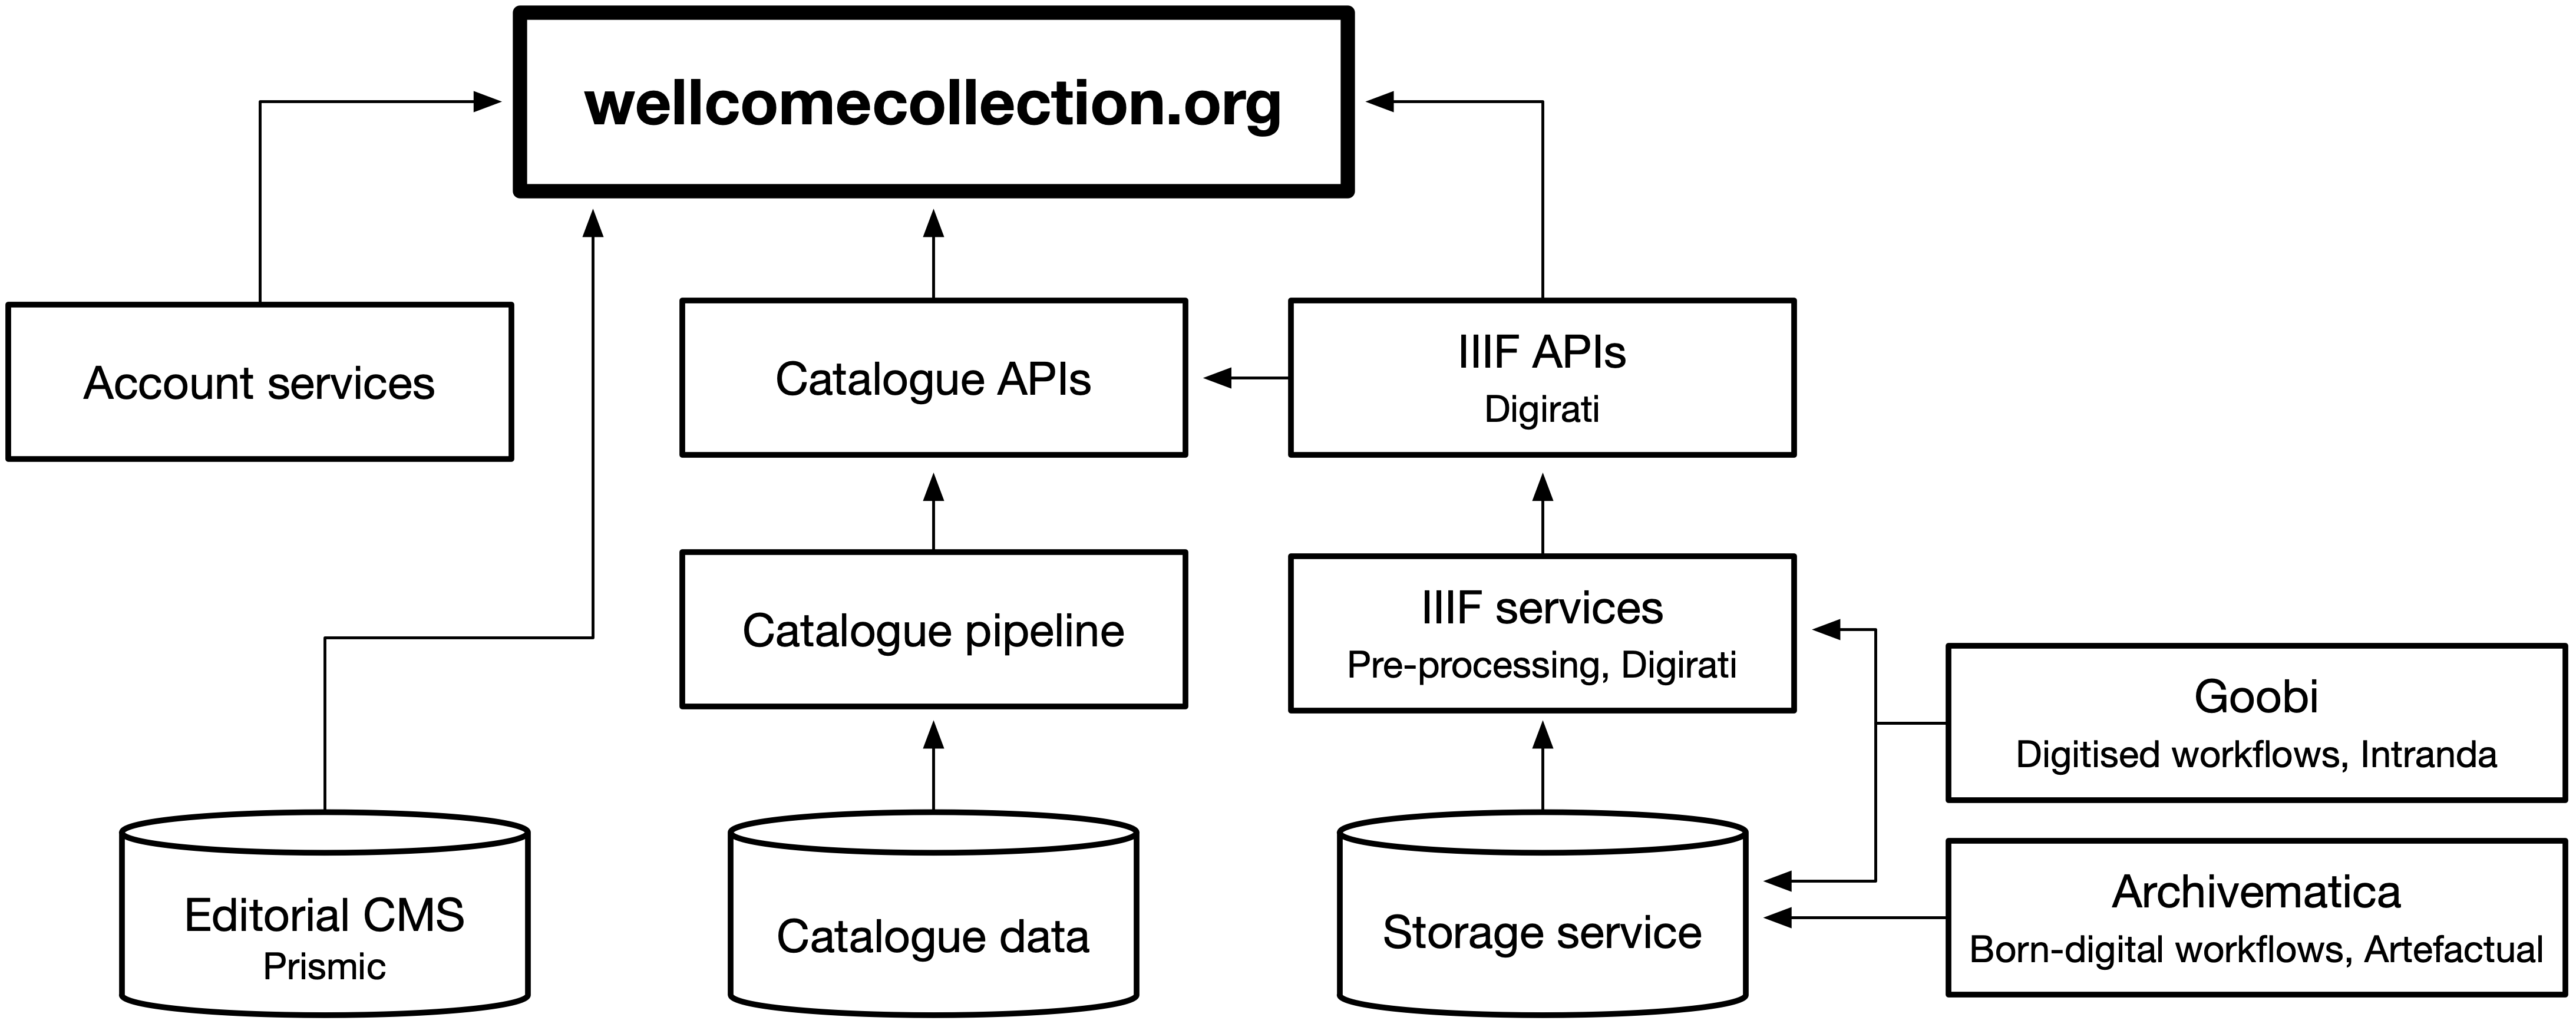 A diagram showing the major services in wellcomecollection.org